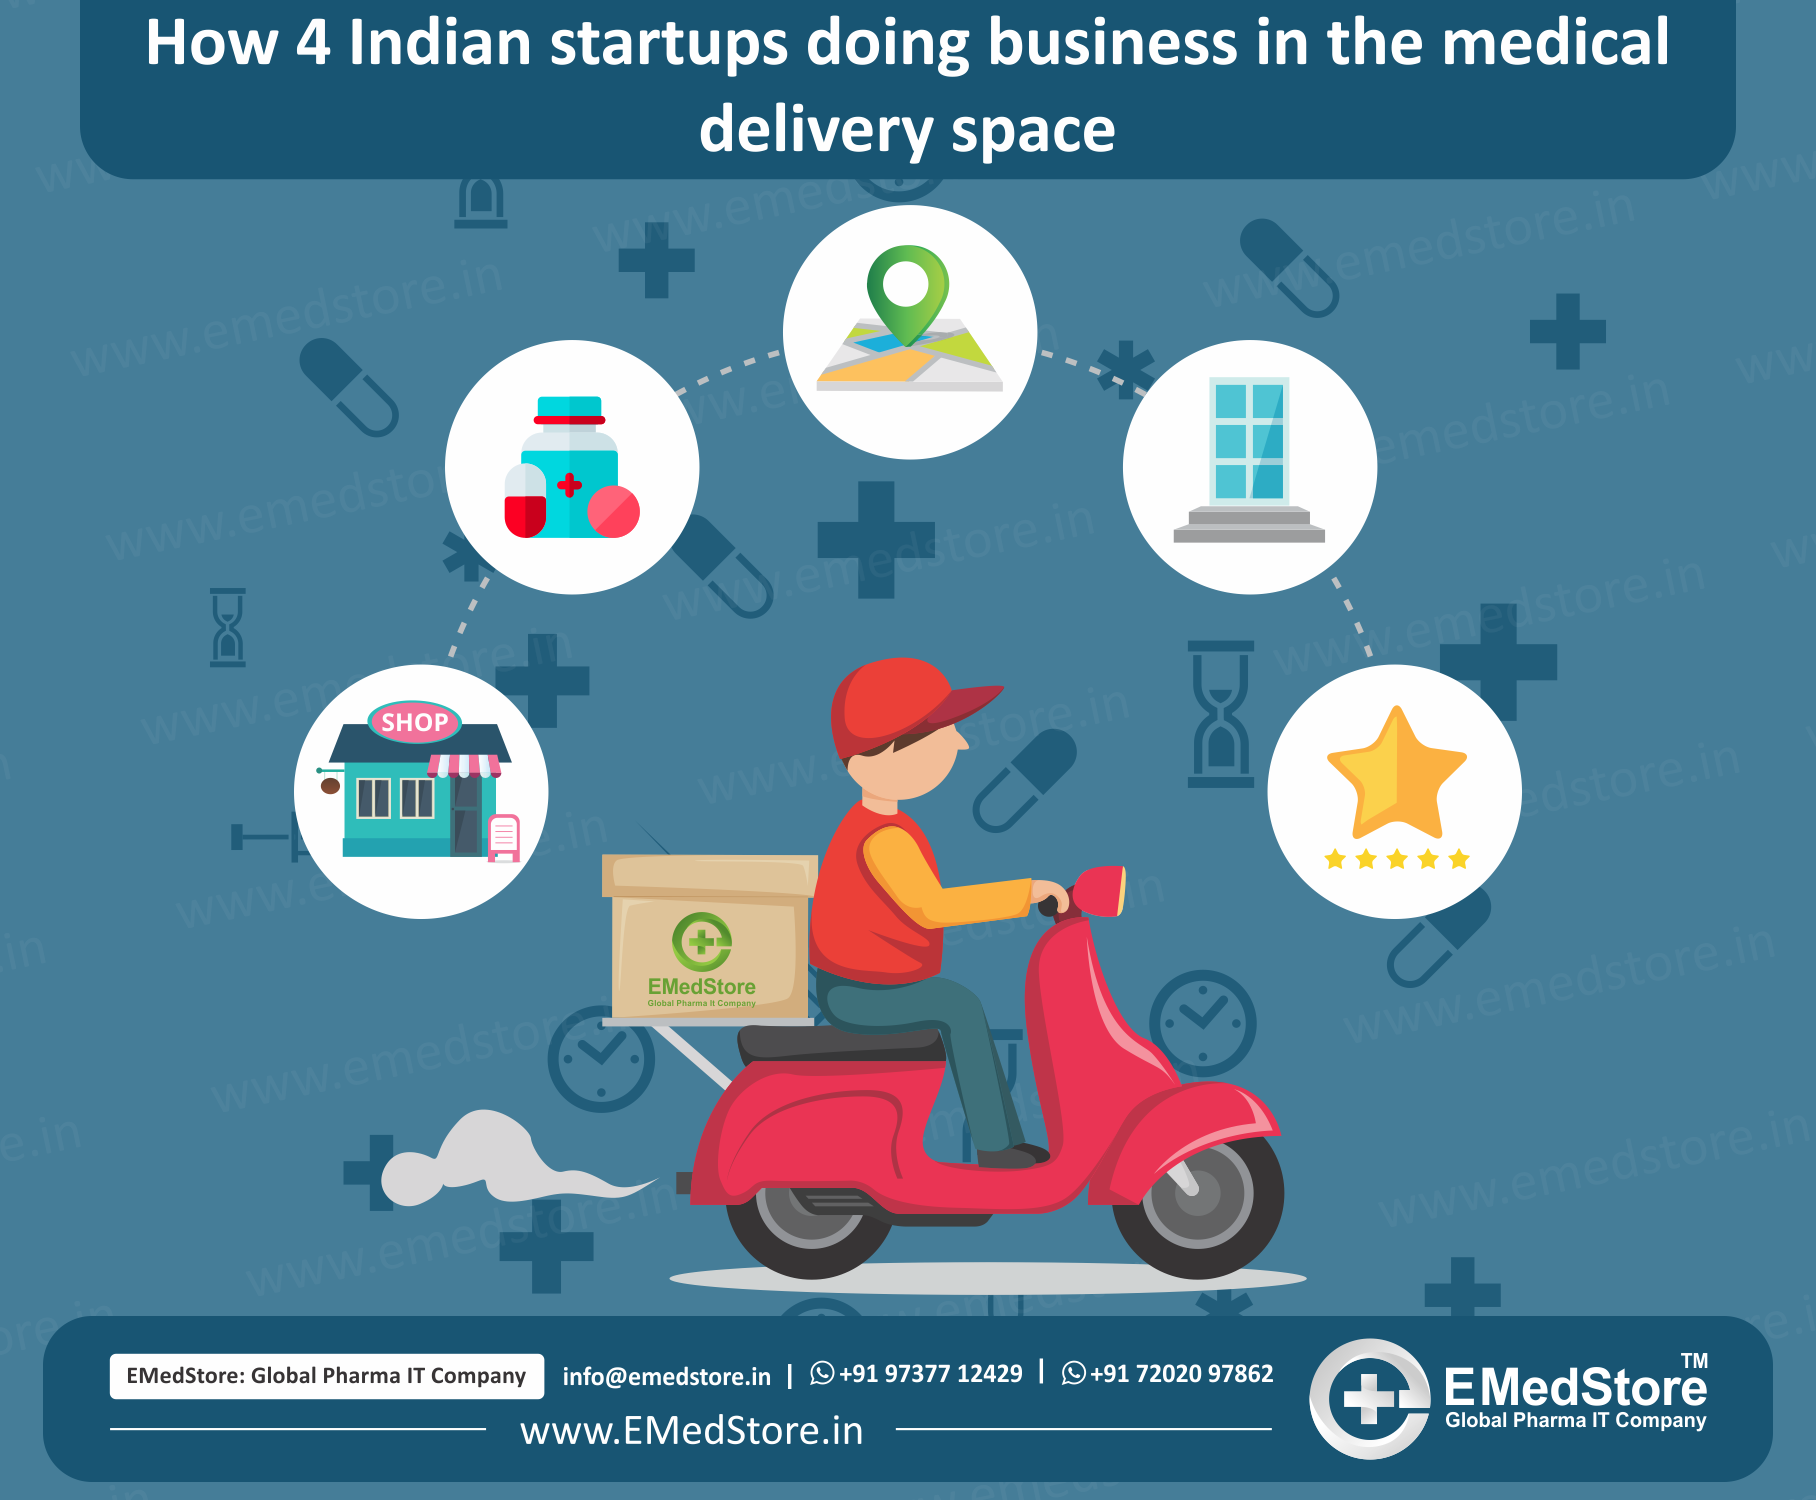 How 4 Indian startups doing business in the medical delivery space